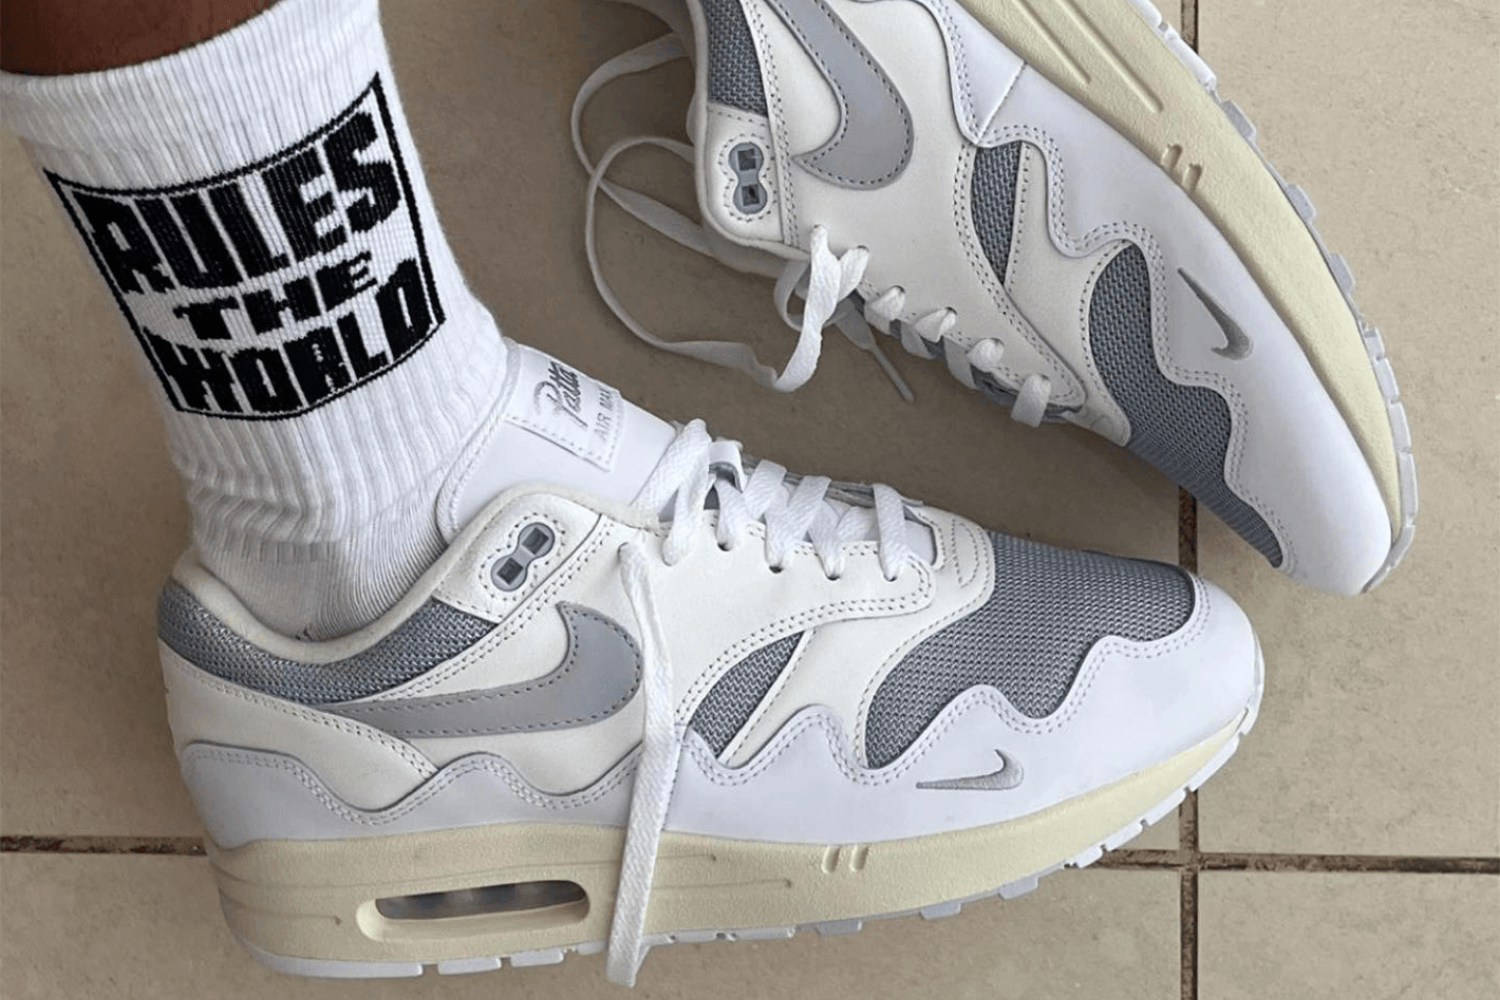 The Patta x Nike Air Max 1 'The Wave' spotted in a white colorway